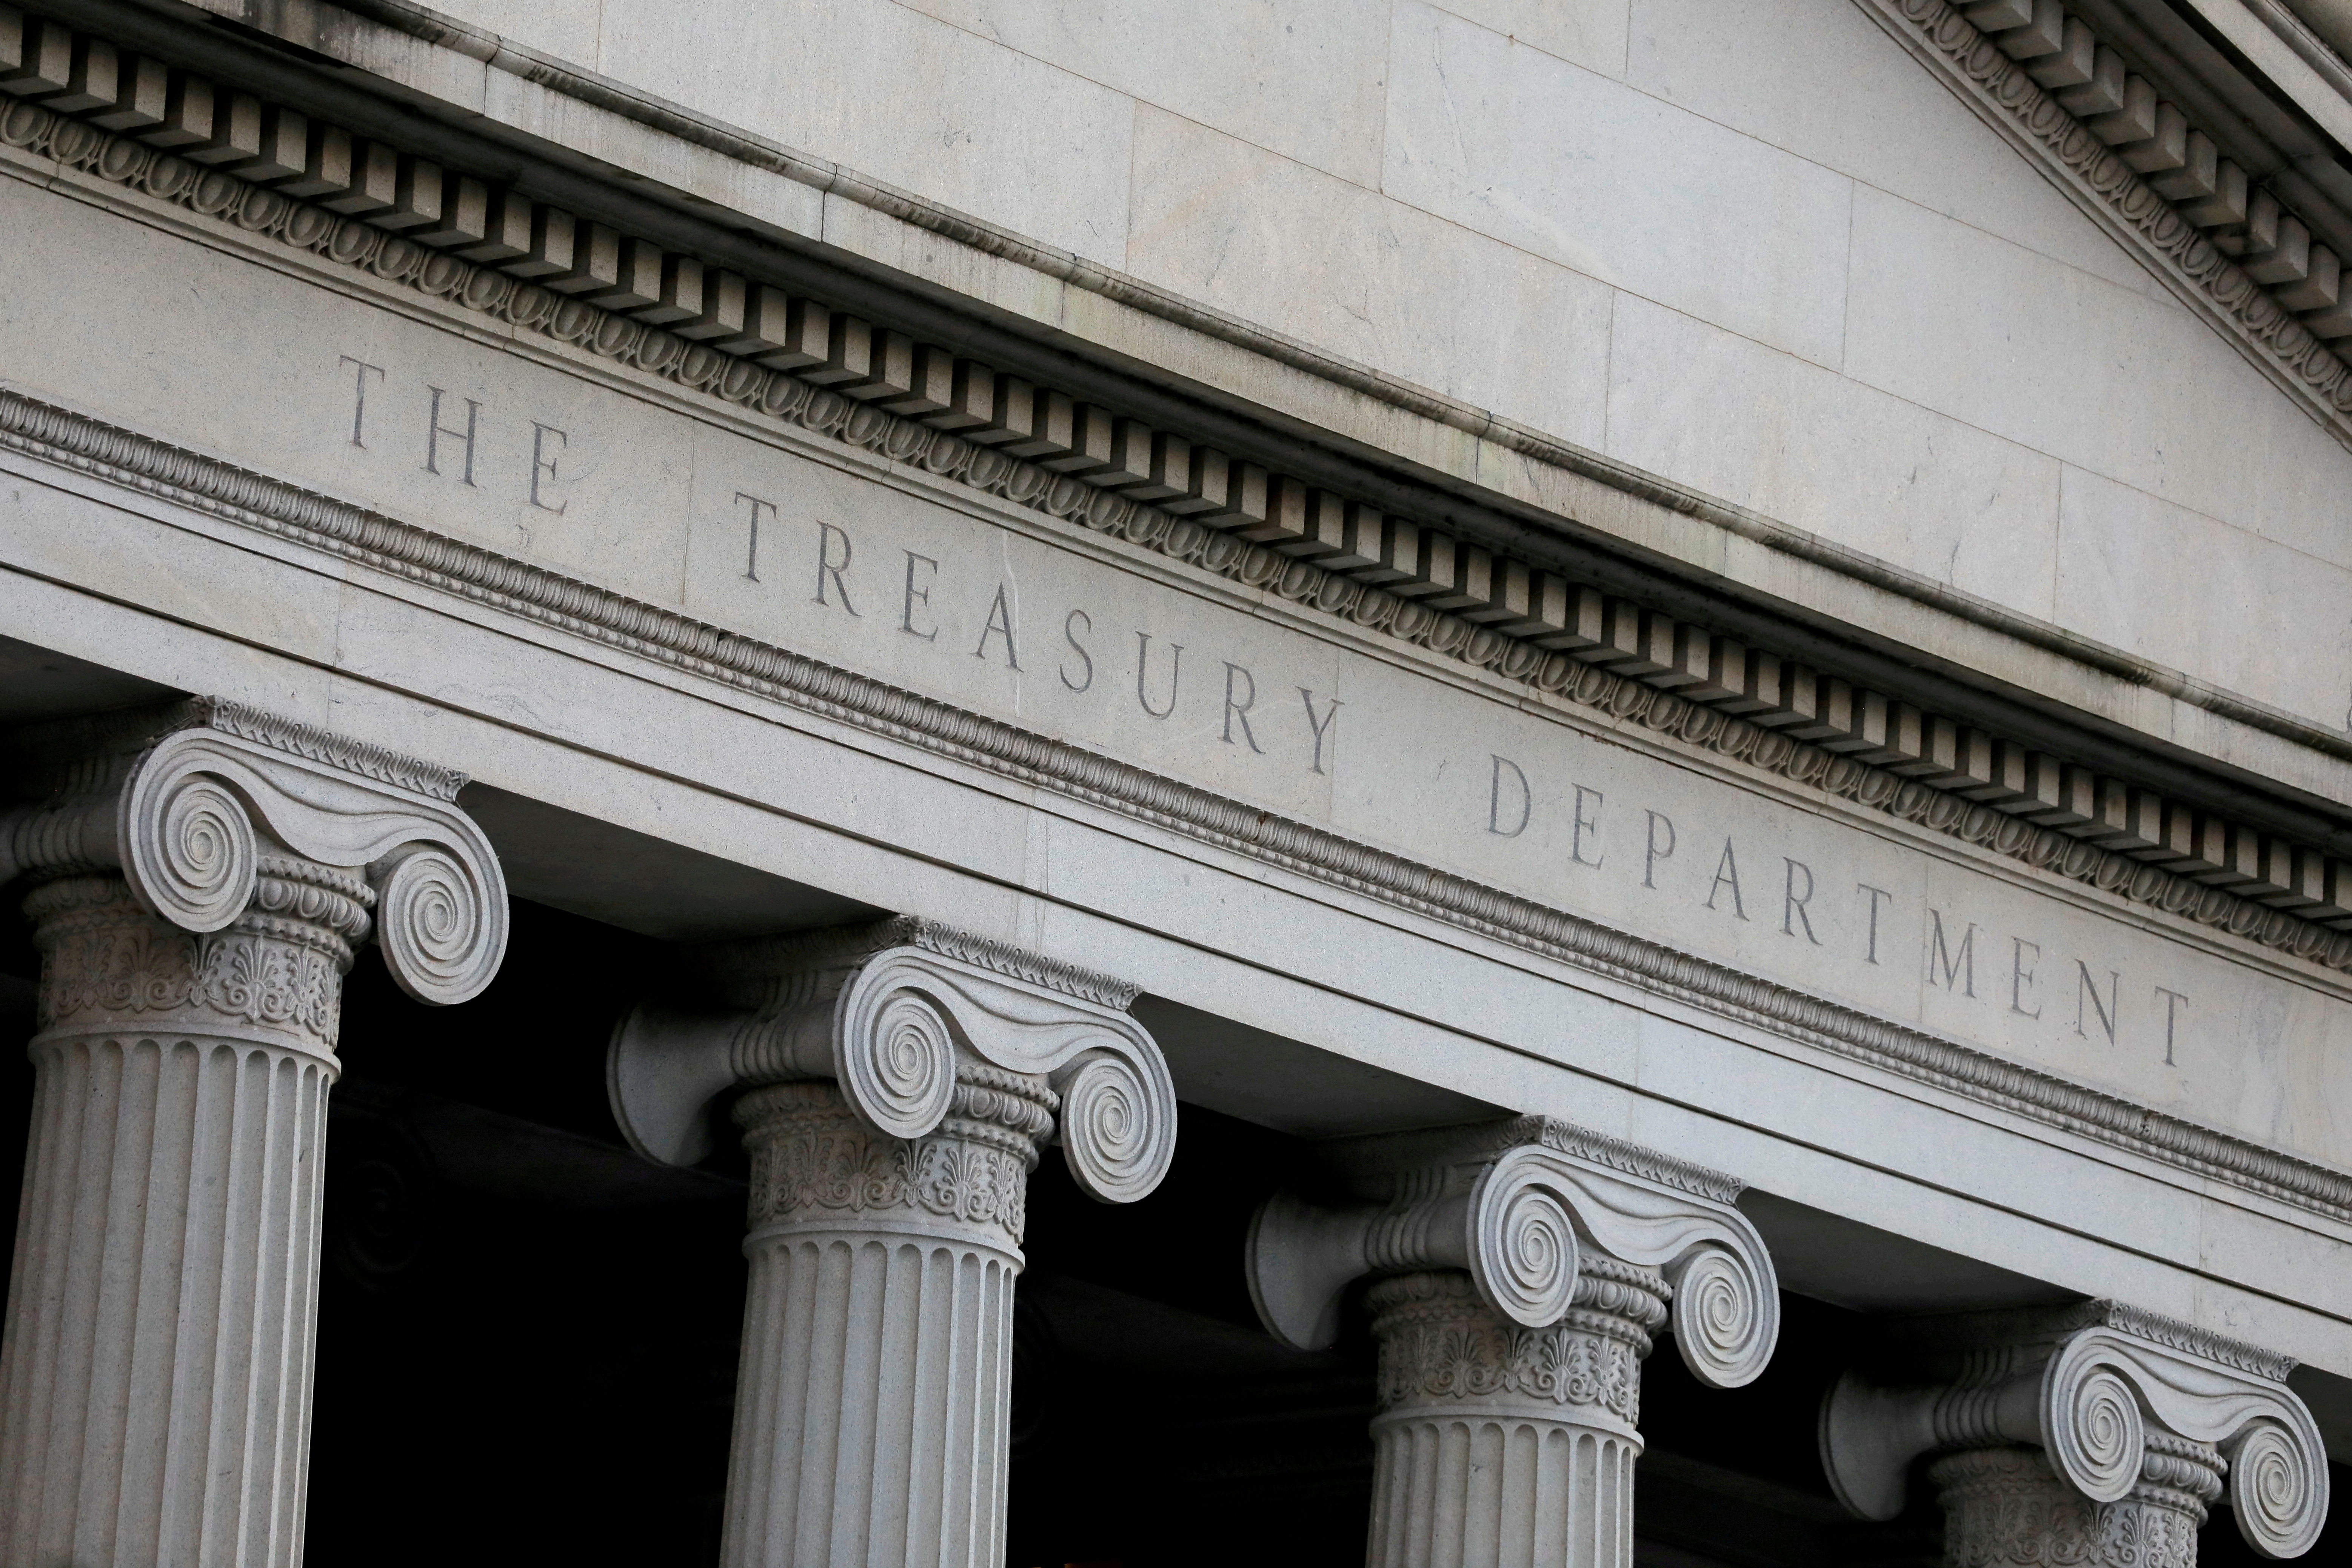 The United States Department of the Treasury is seen in Washington, D.C., U.S., August 30, 2020. REUTERS/Andrew Kelly/File Photo